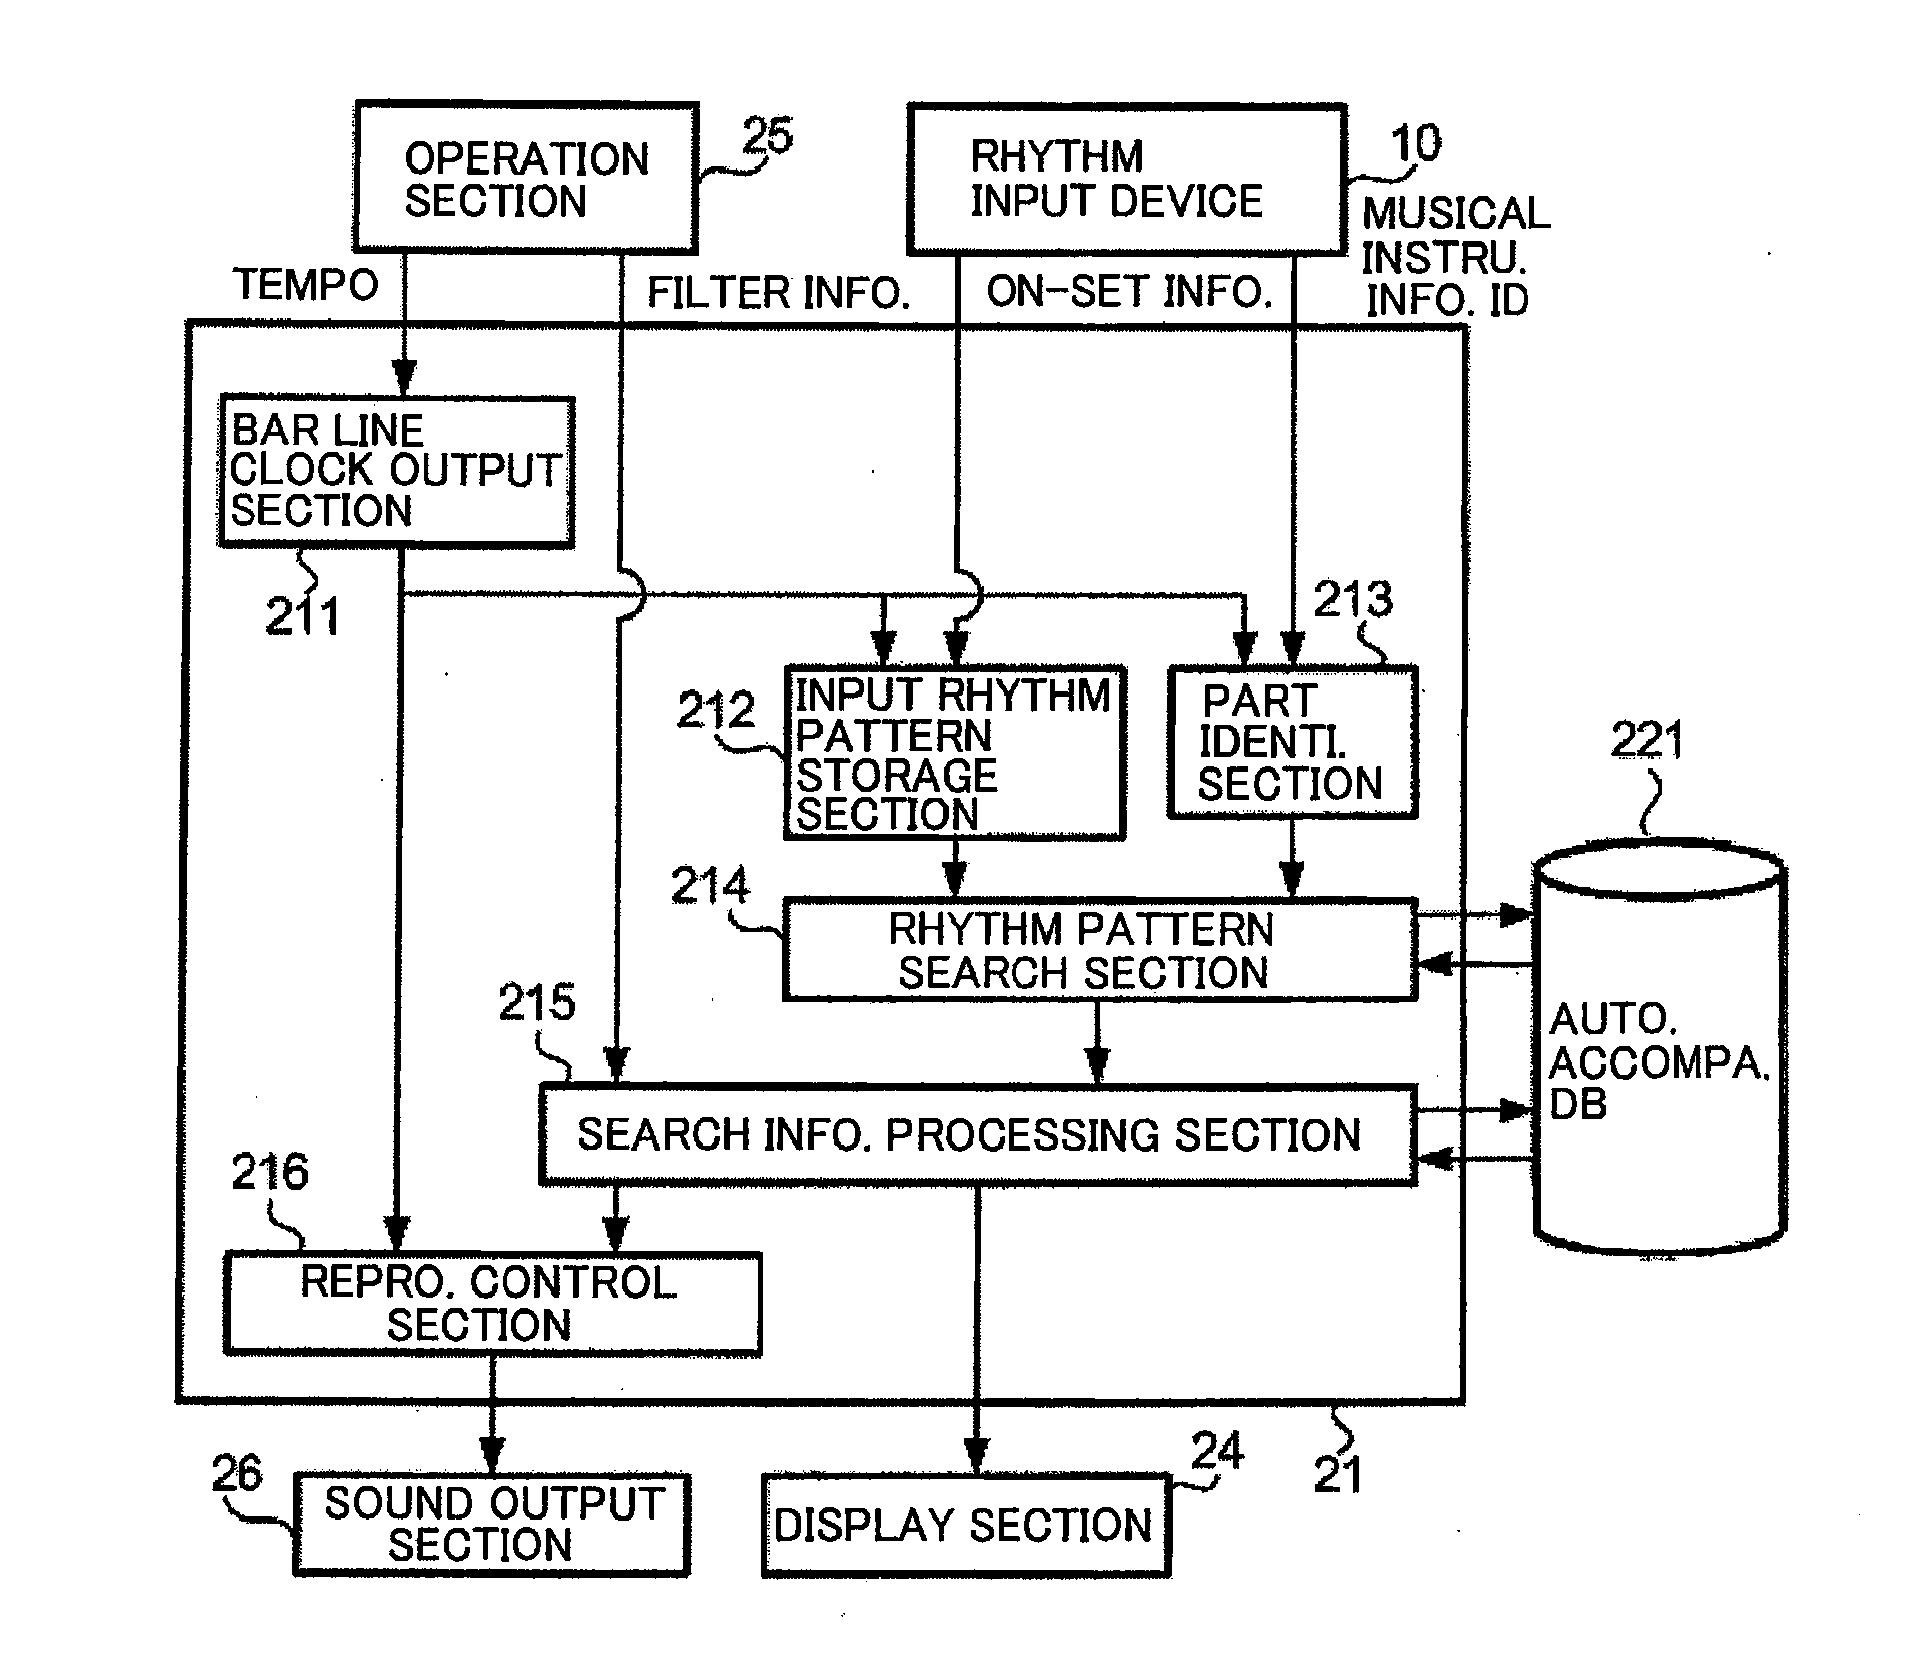 Performance data search using a query indicative of a tone generation pattern